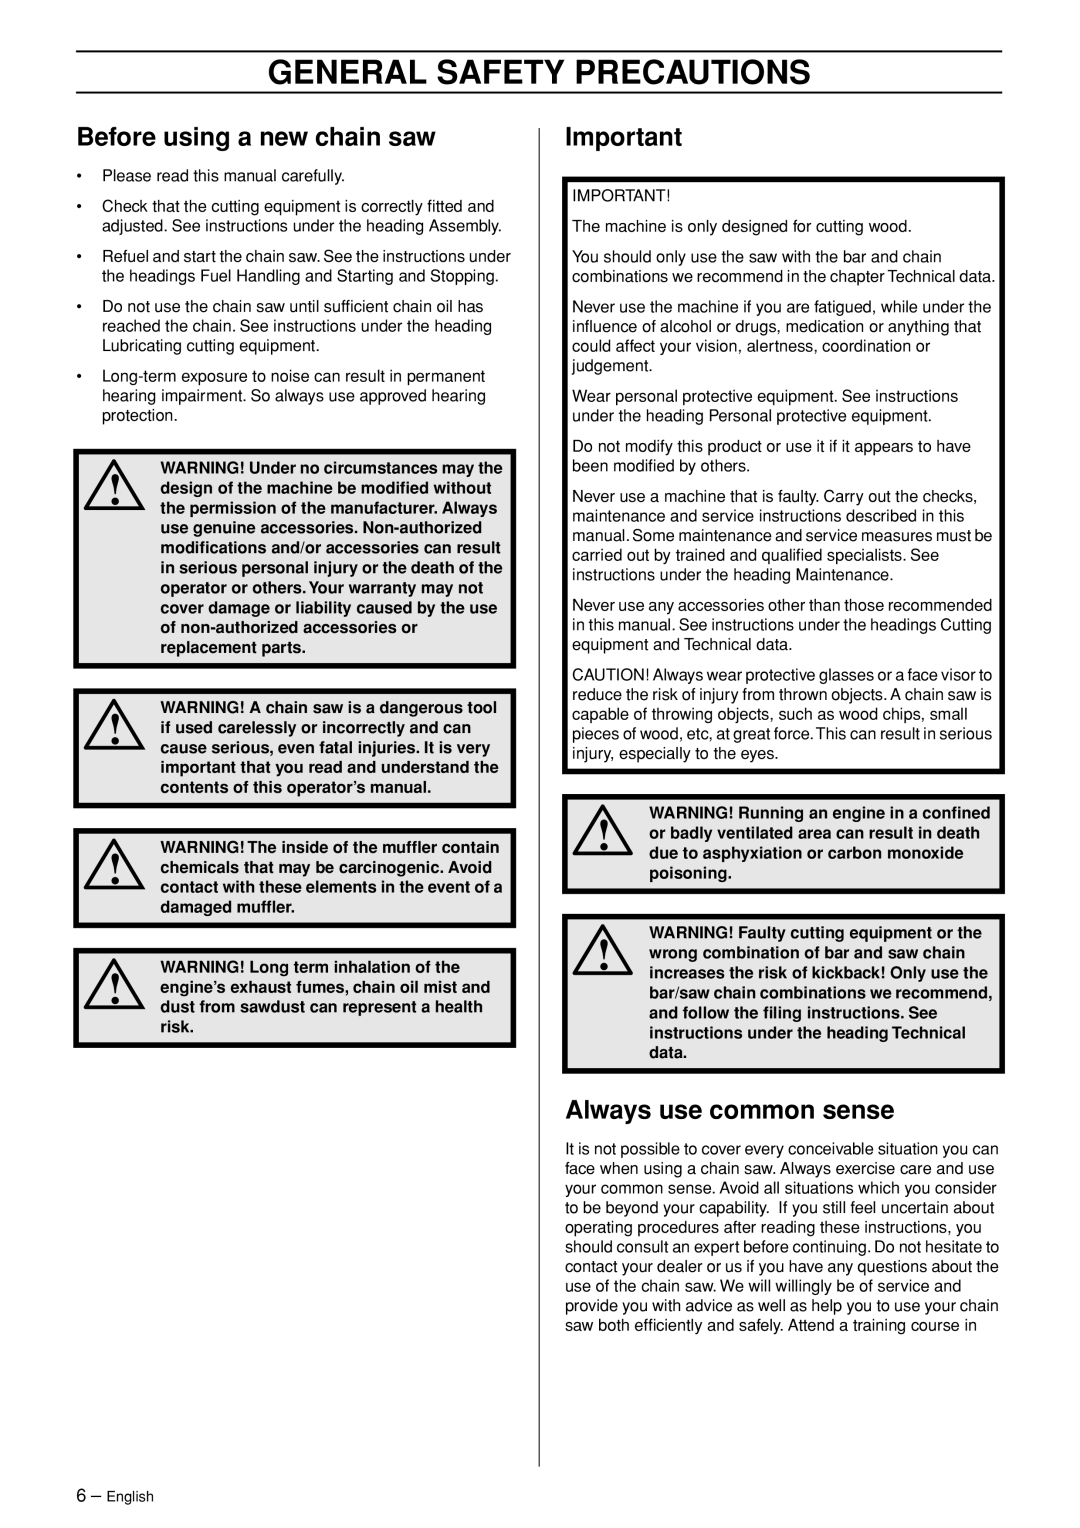 Husqvarna 336 manual General Safety Precautions, Before using a new chain saw, Always use common sense 